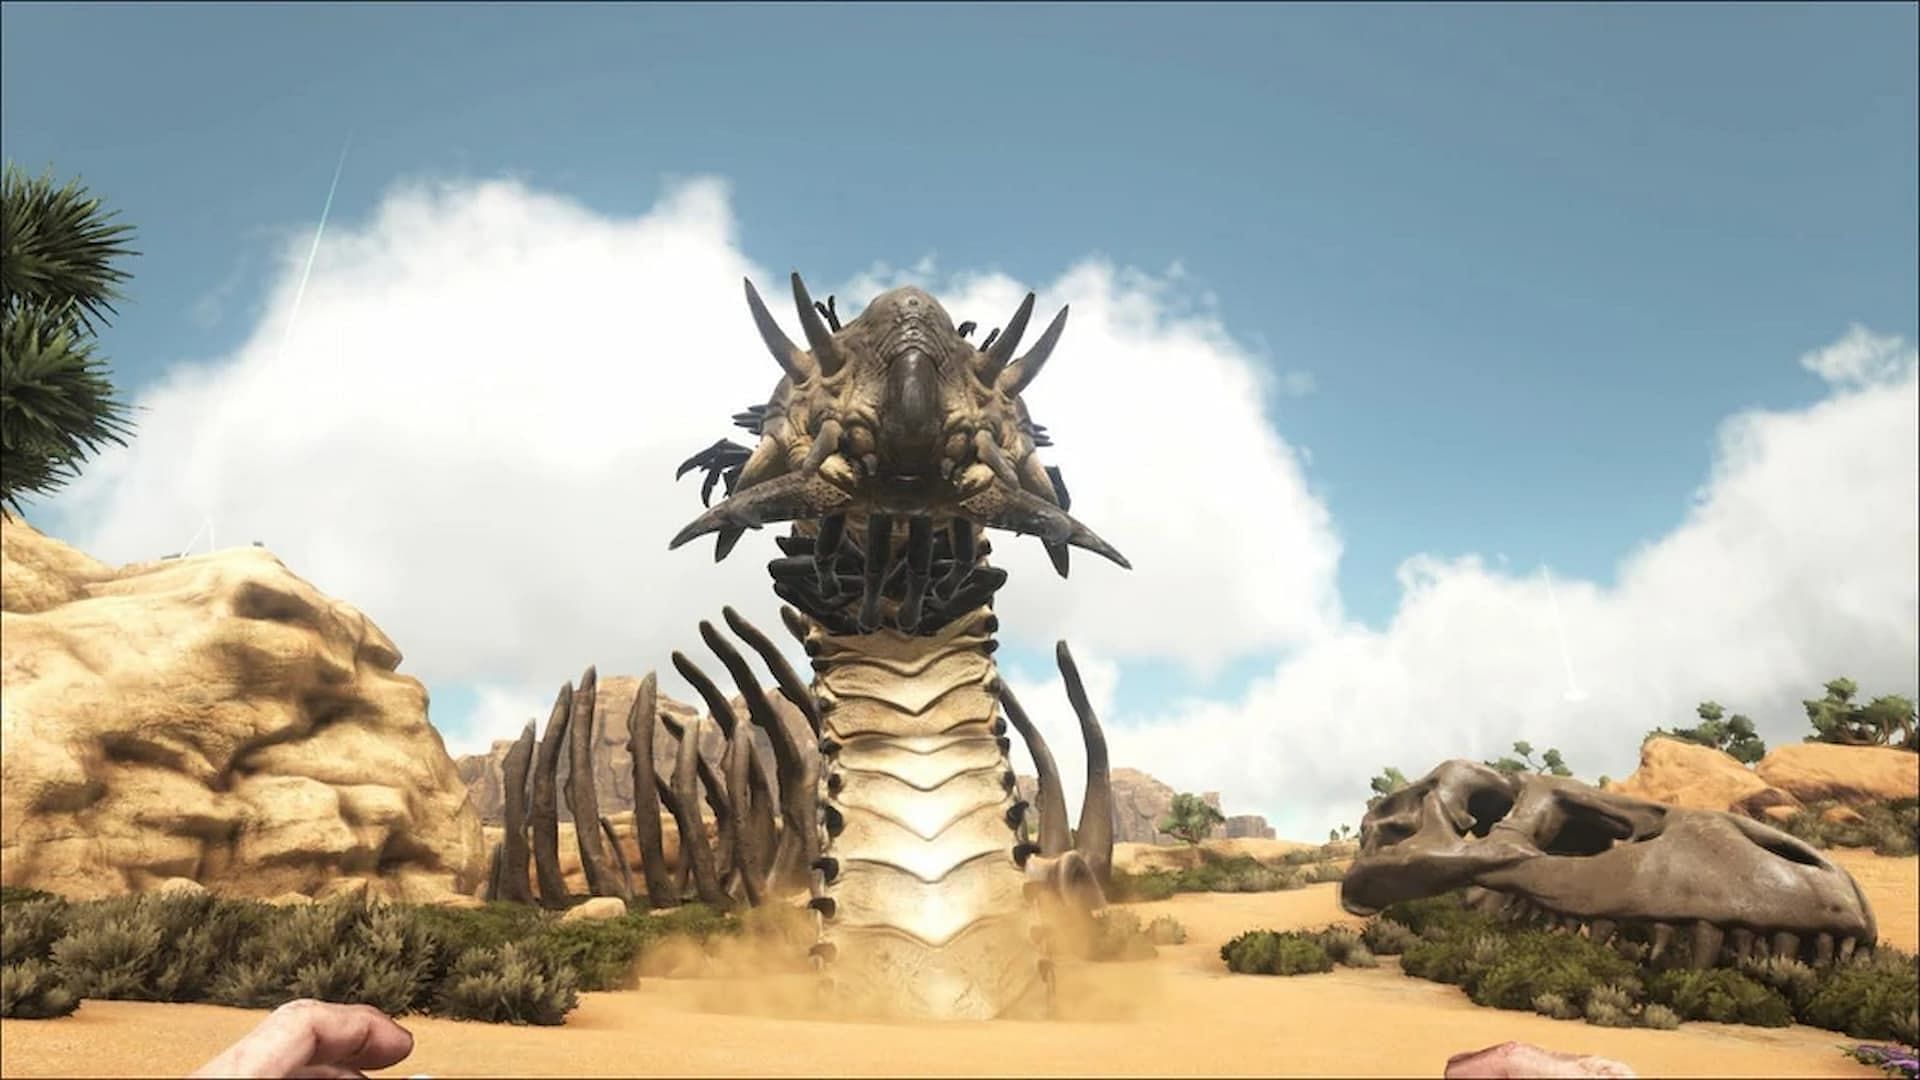 A Deathworm is an extremely aggressive creature in Ark Survival Ascended (Image via Studio Wildcard)